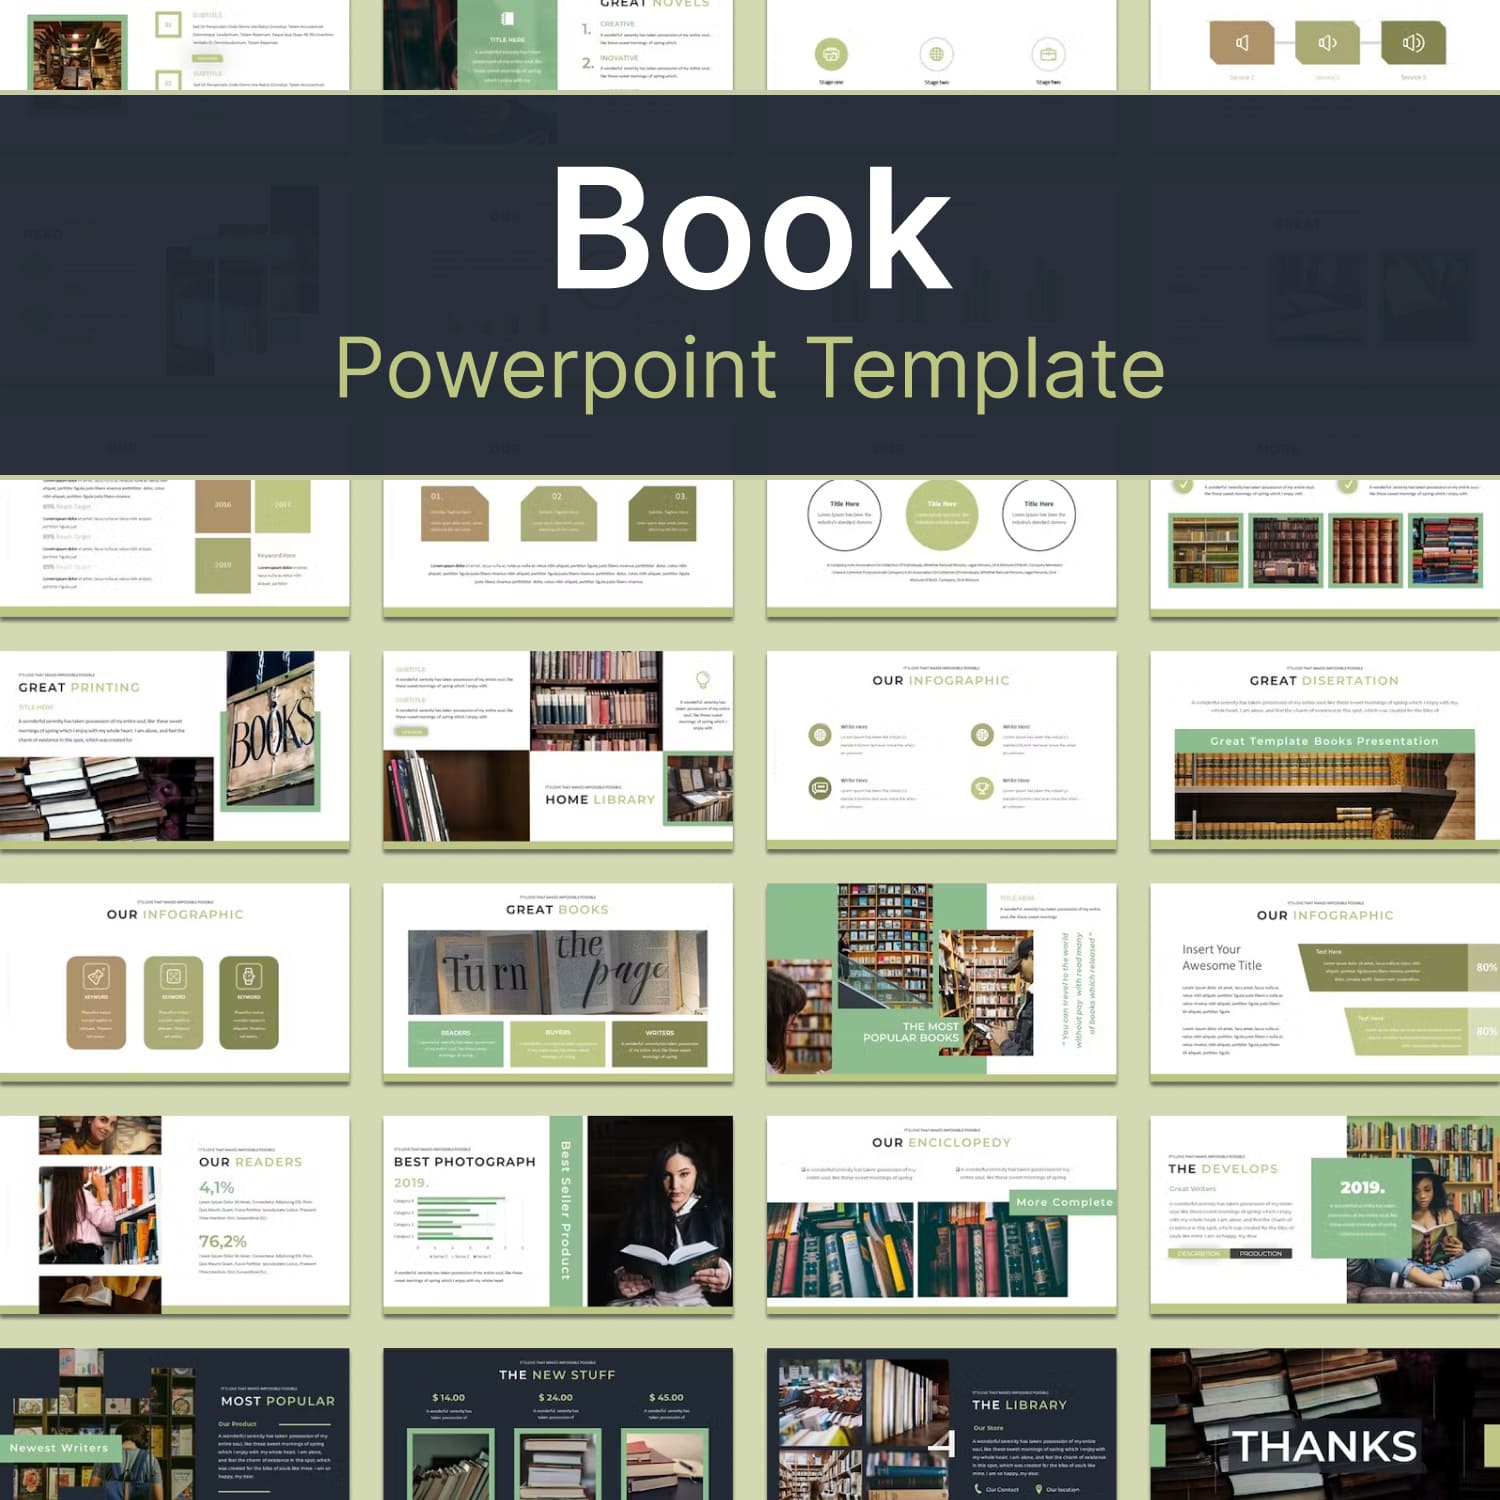 Book powerpoint template - main image preview.